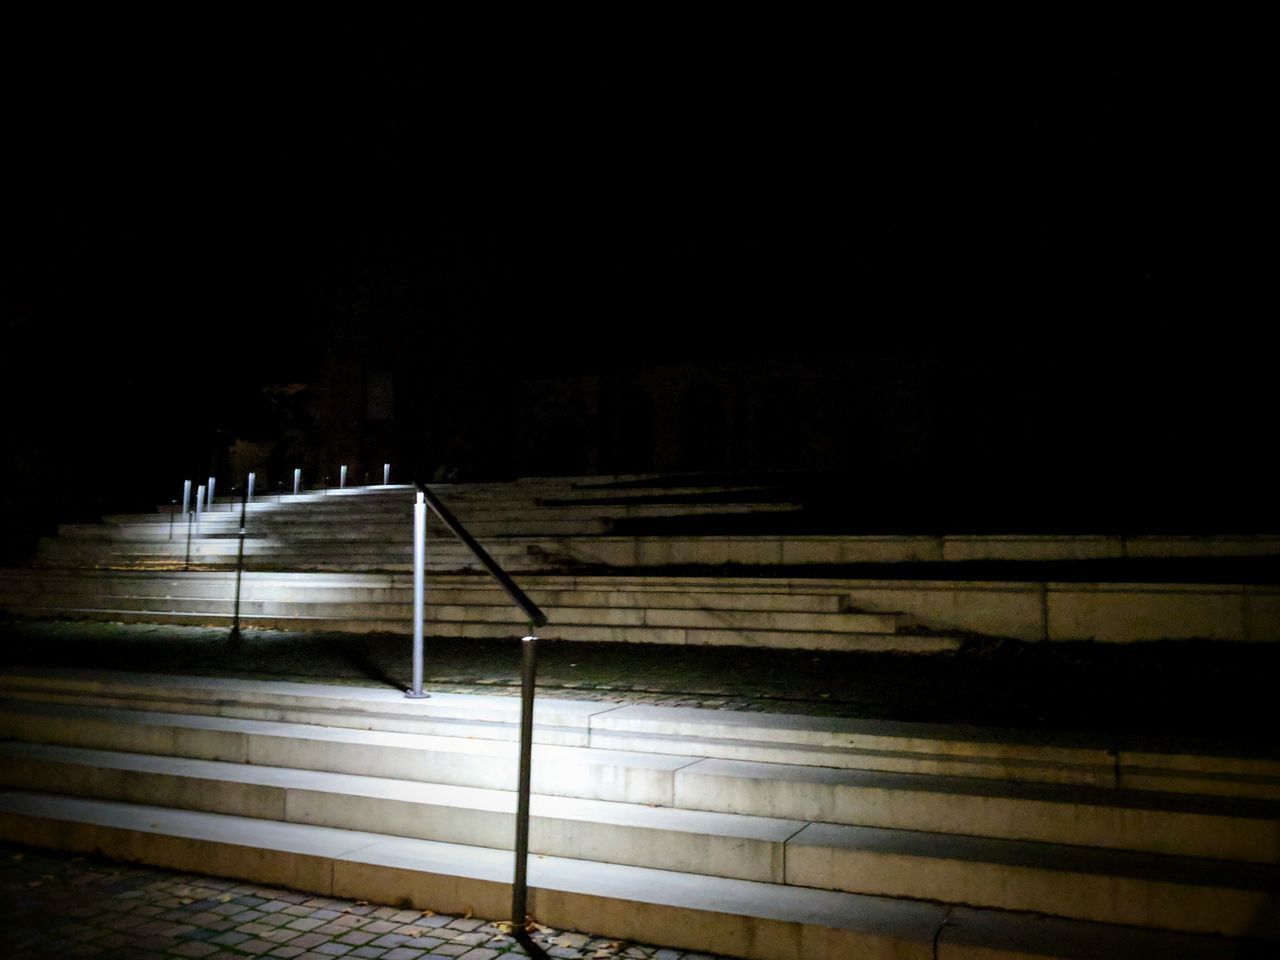 night, steps and staircases, staircase, steps, railing, dark, illuminated, stairs, no people, hand rail, architecture, outdoors